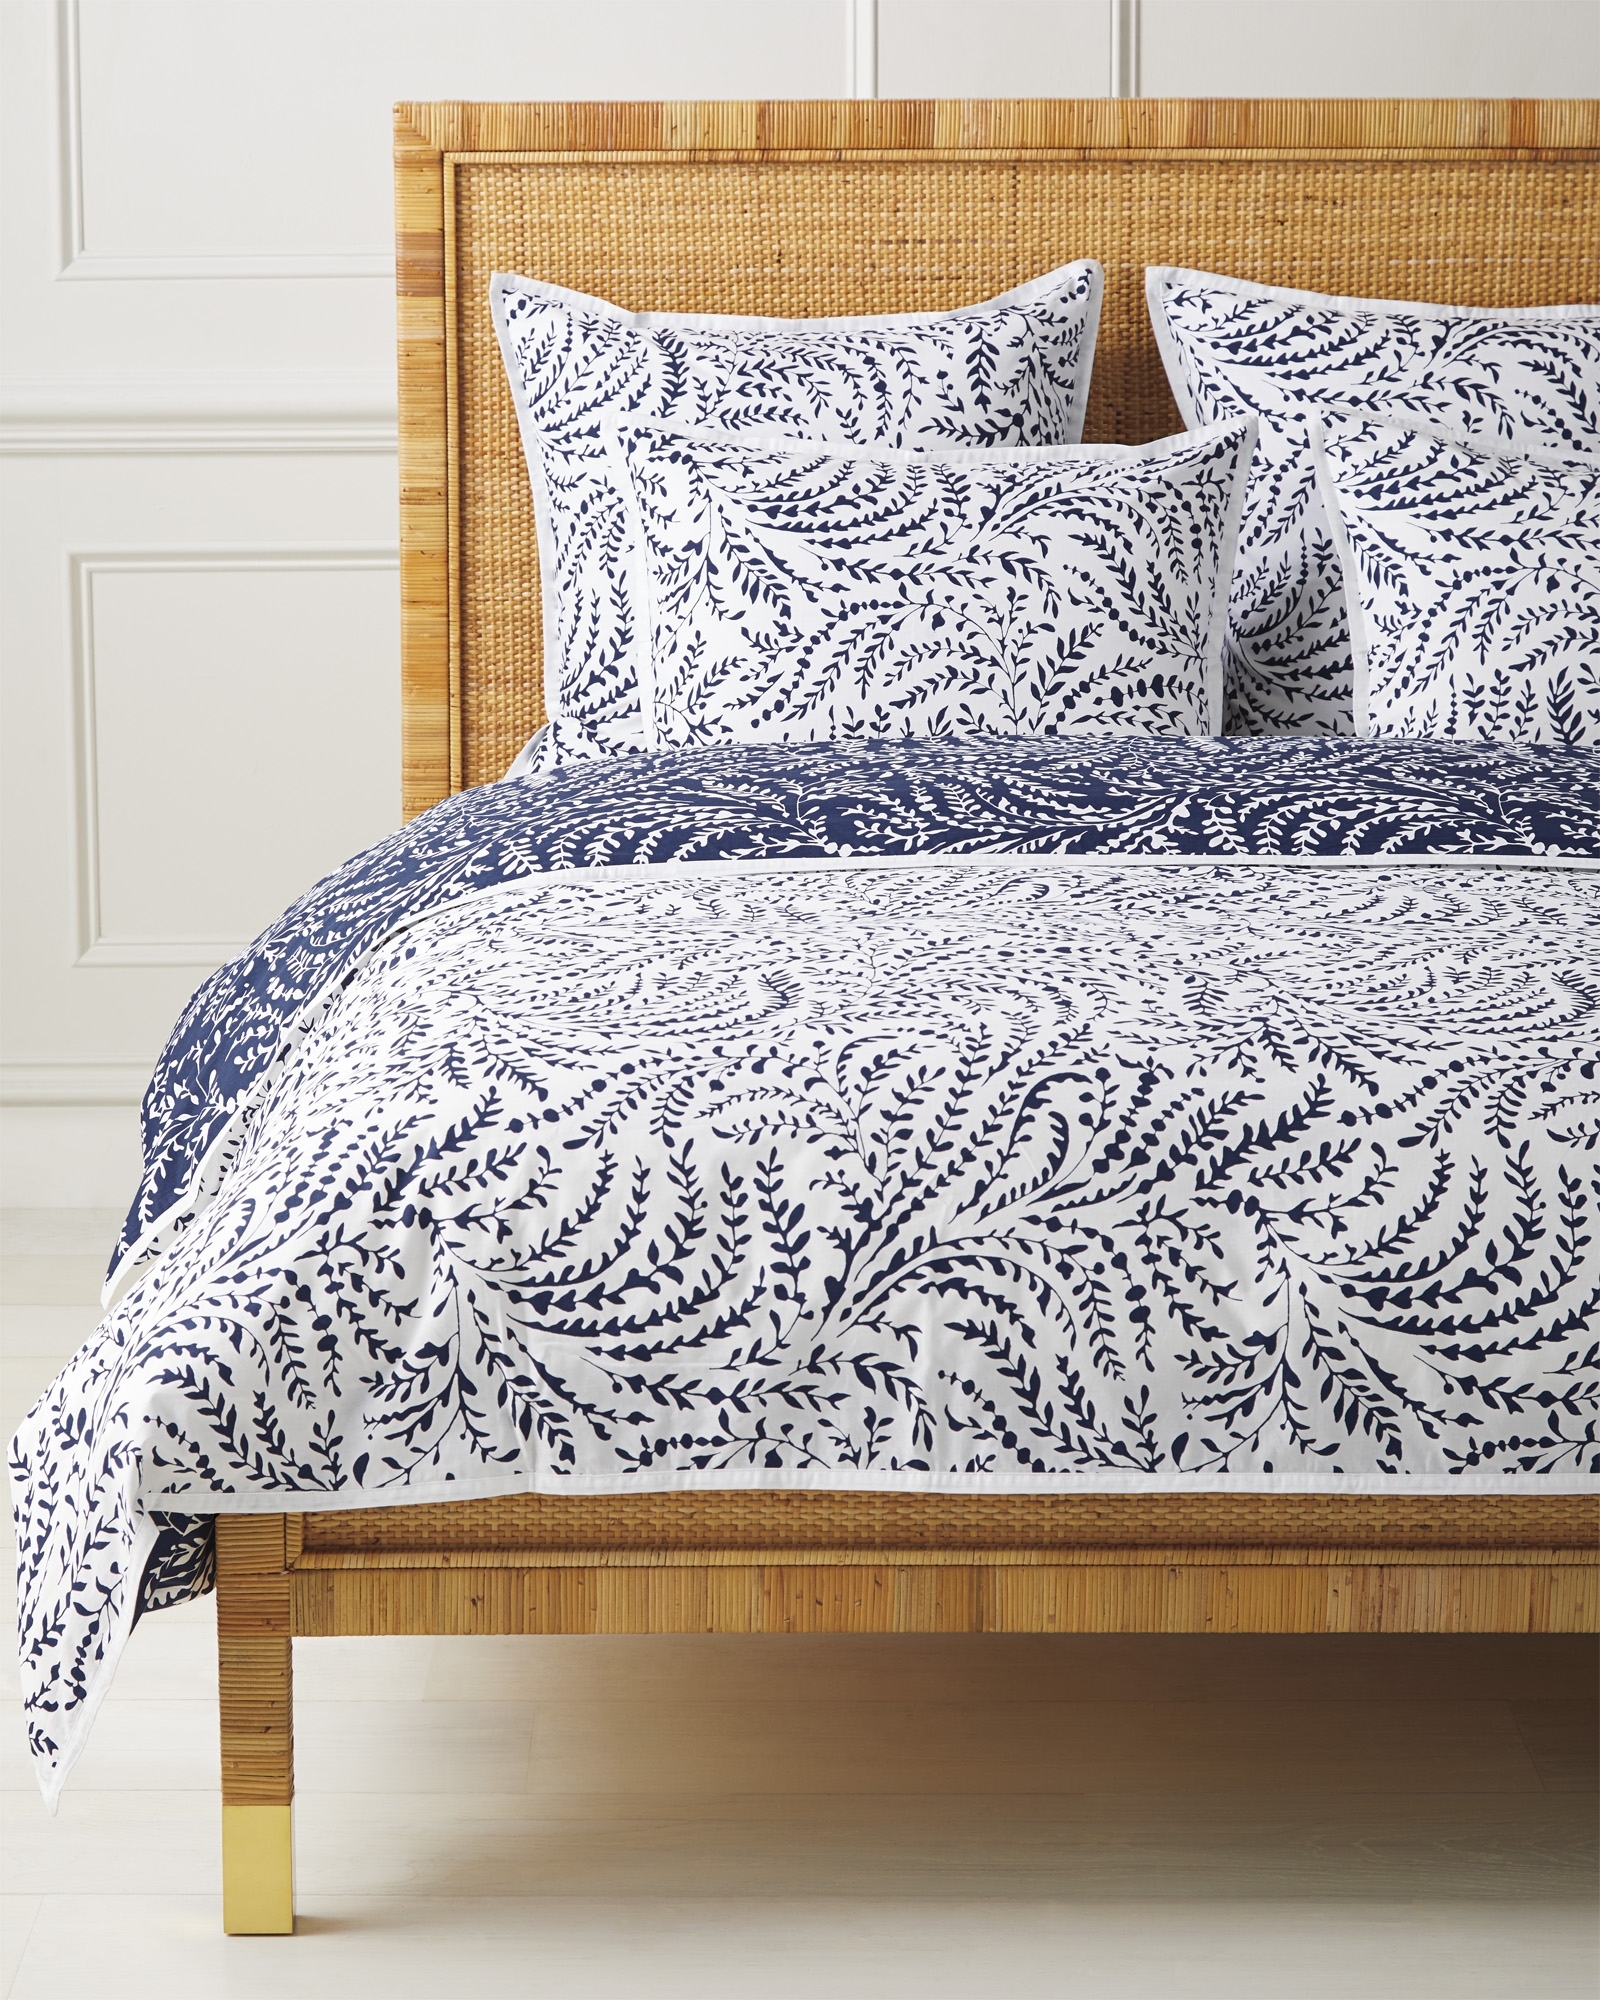 Priano Full/Queen Duvet Cover - Navy - Insert sold separately - Image 0